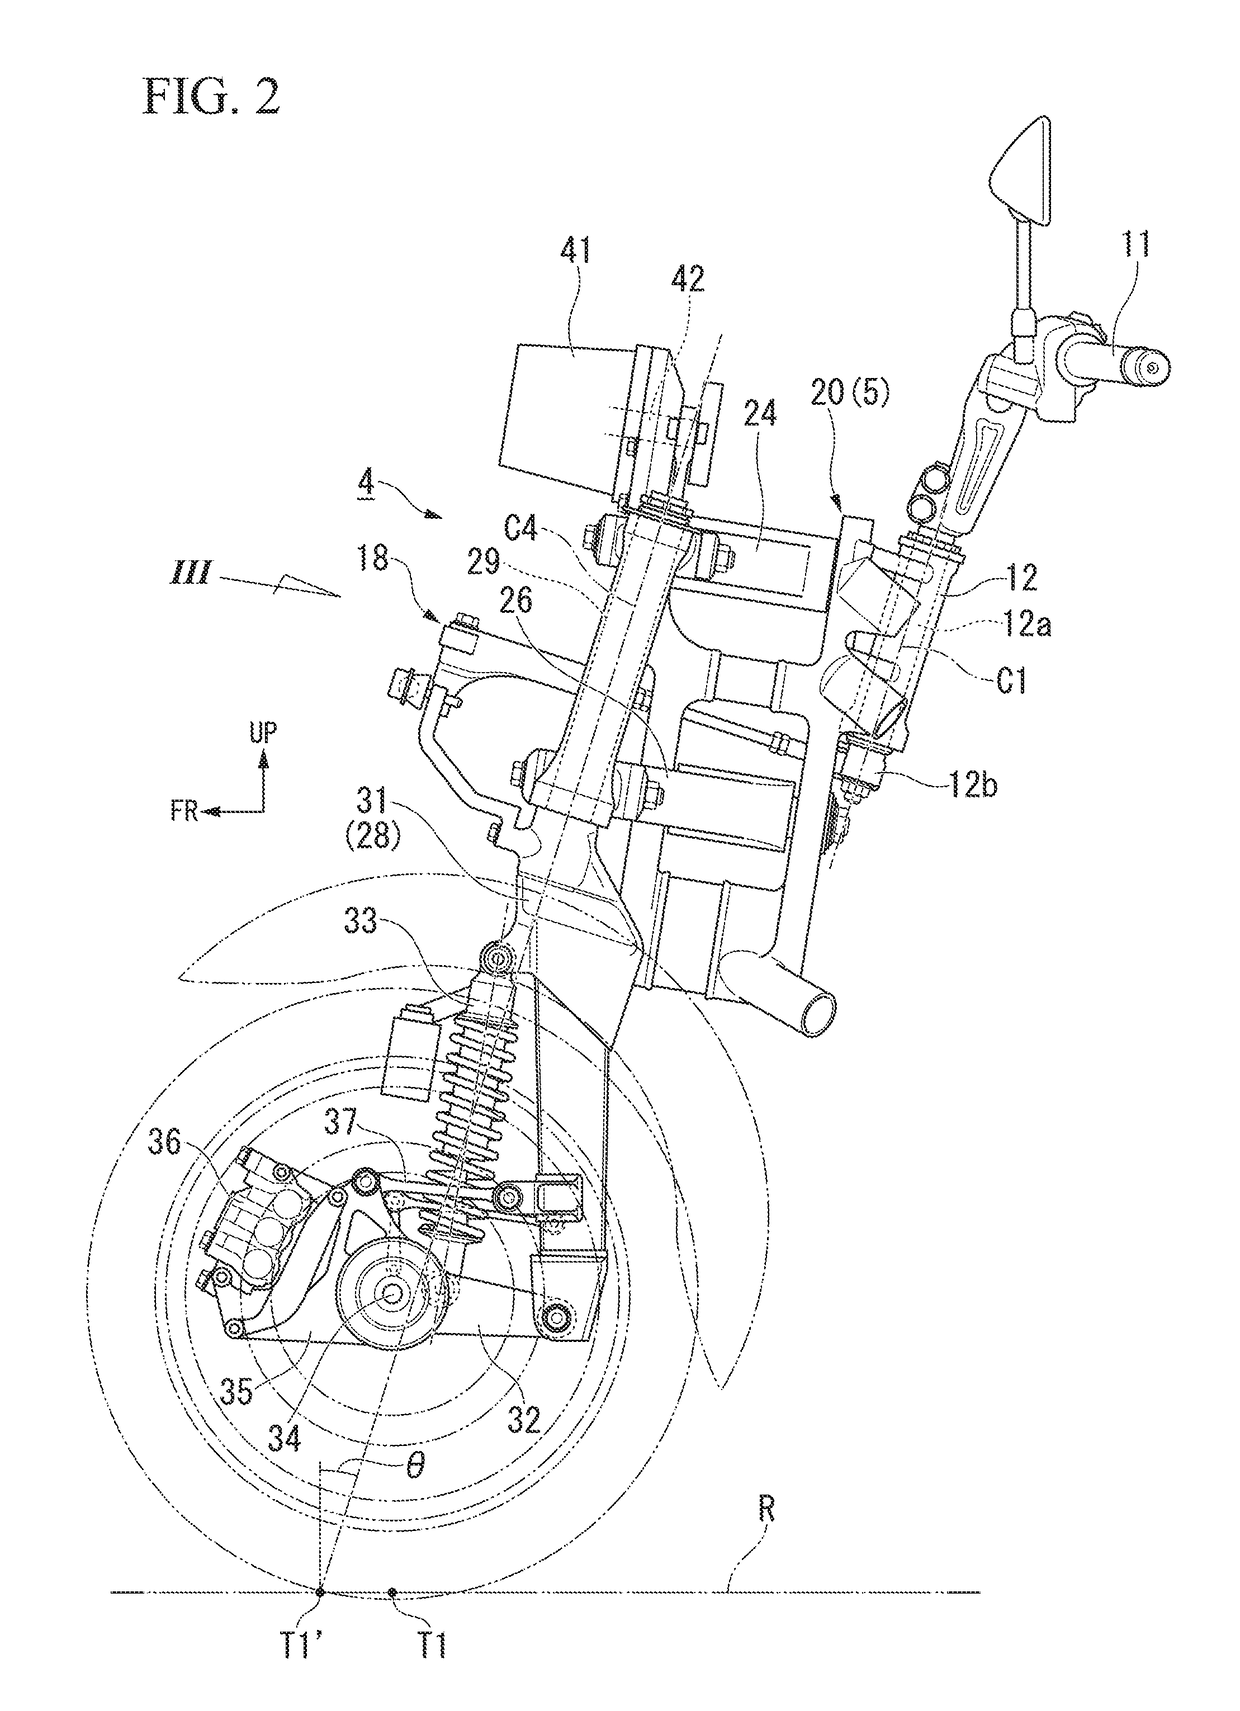 Rocking control device for two front wheels rocking vehicle